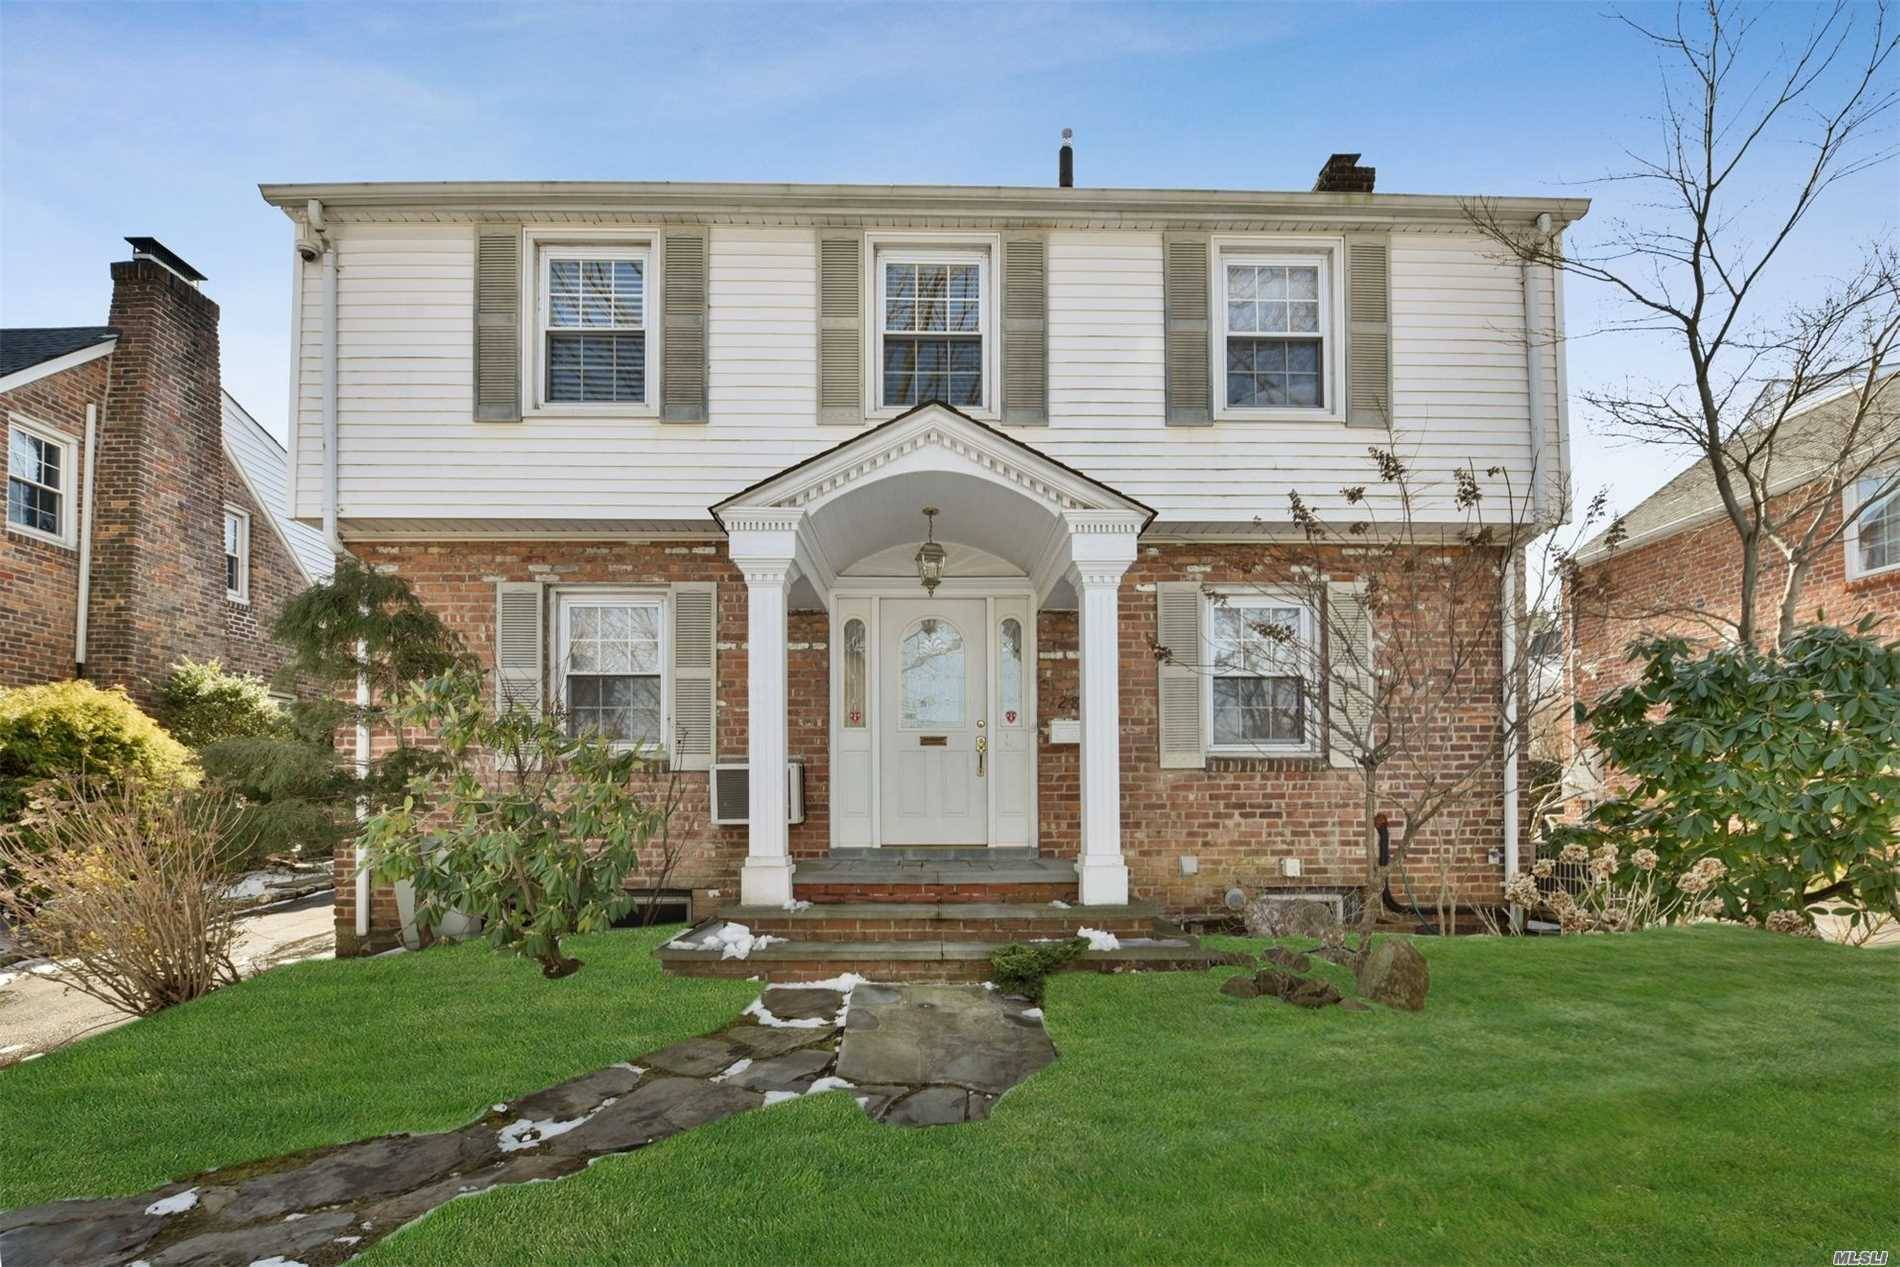 Center Hall Colonial In The Sought After Uplands, Conveniently Located Near Parks, Shopping And Buses.